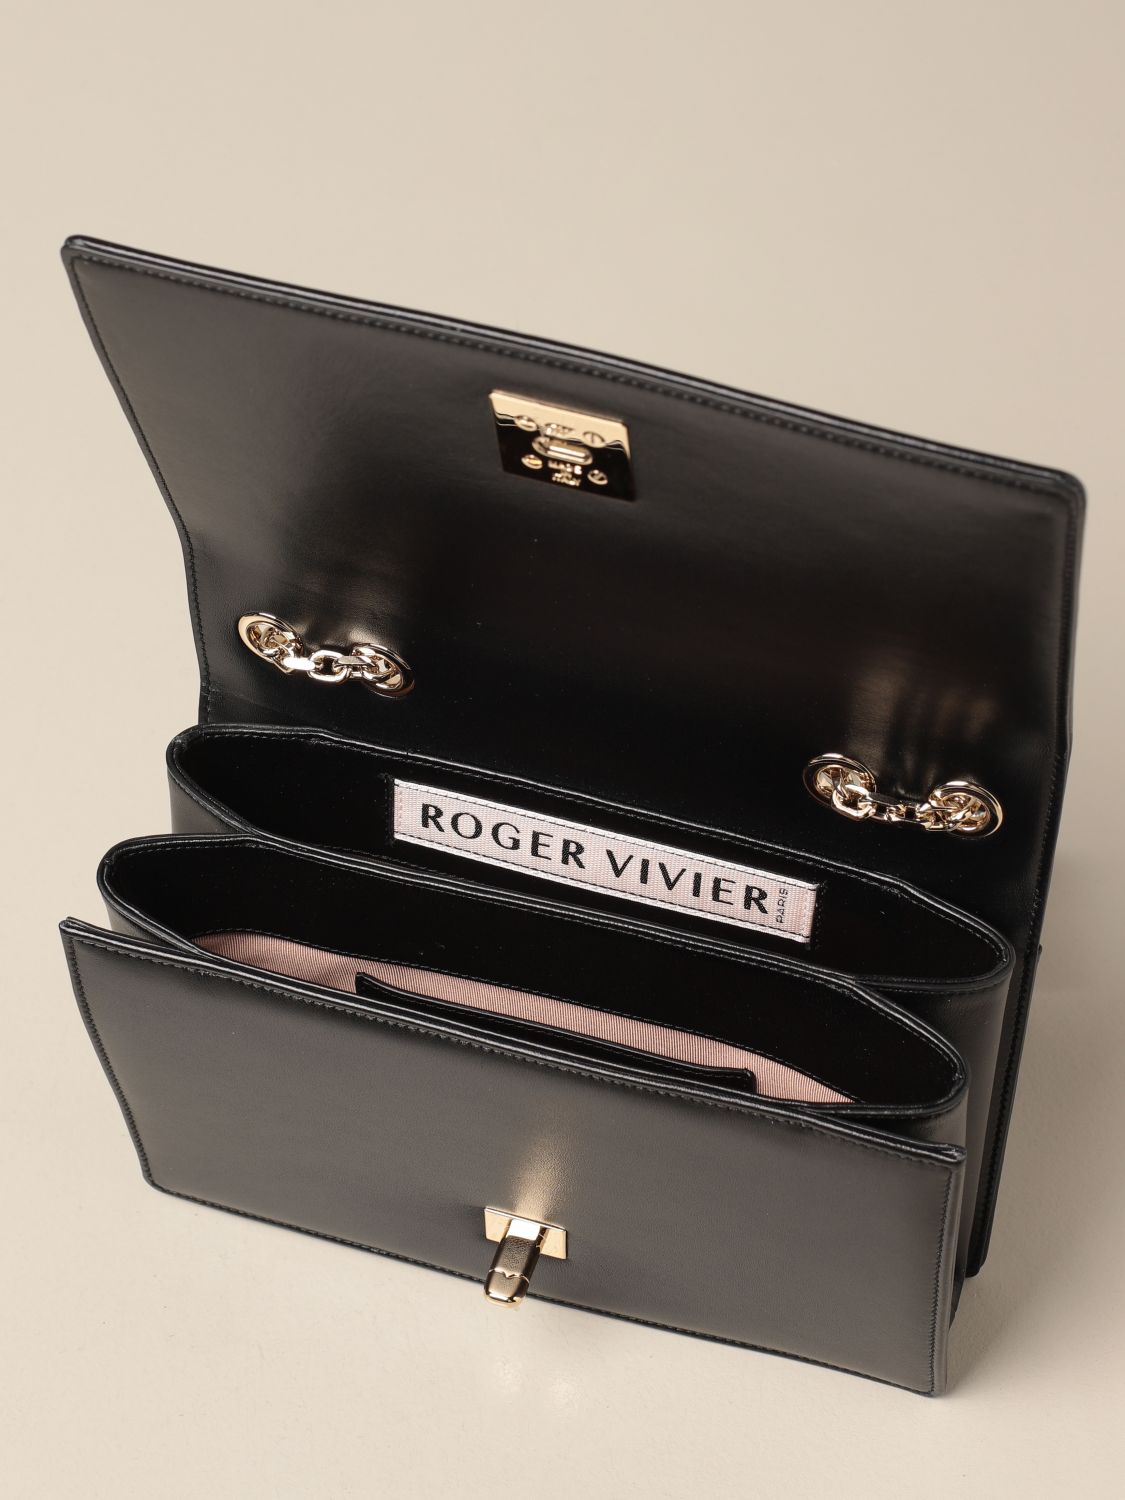 Miss Vivier Roger Vivier bag in hand painted nappa leather